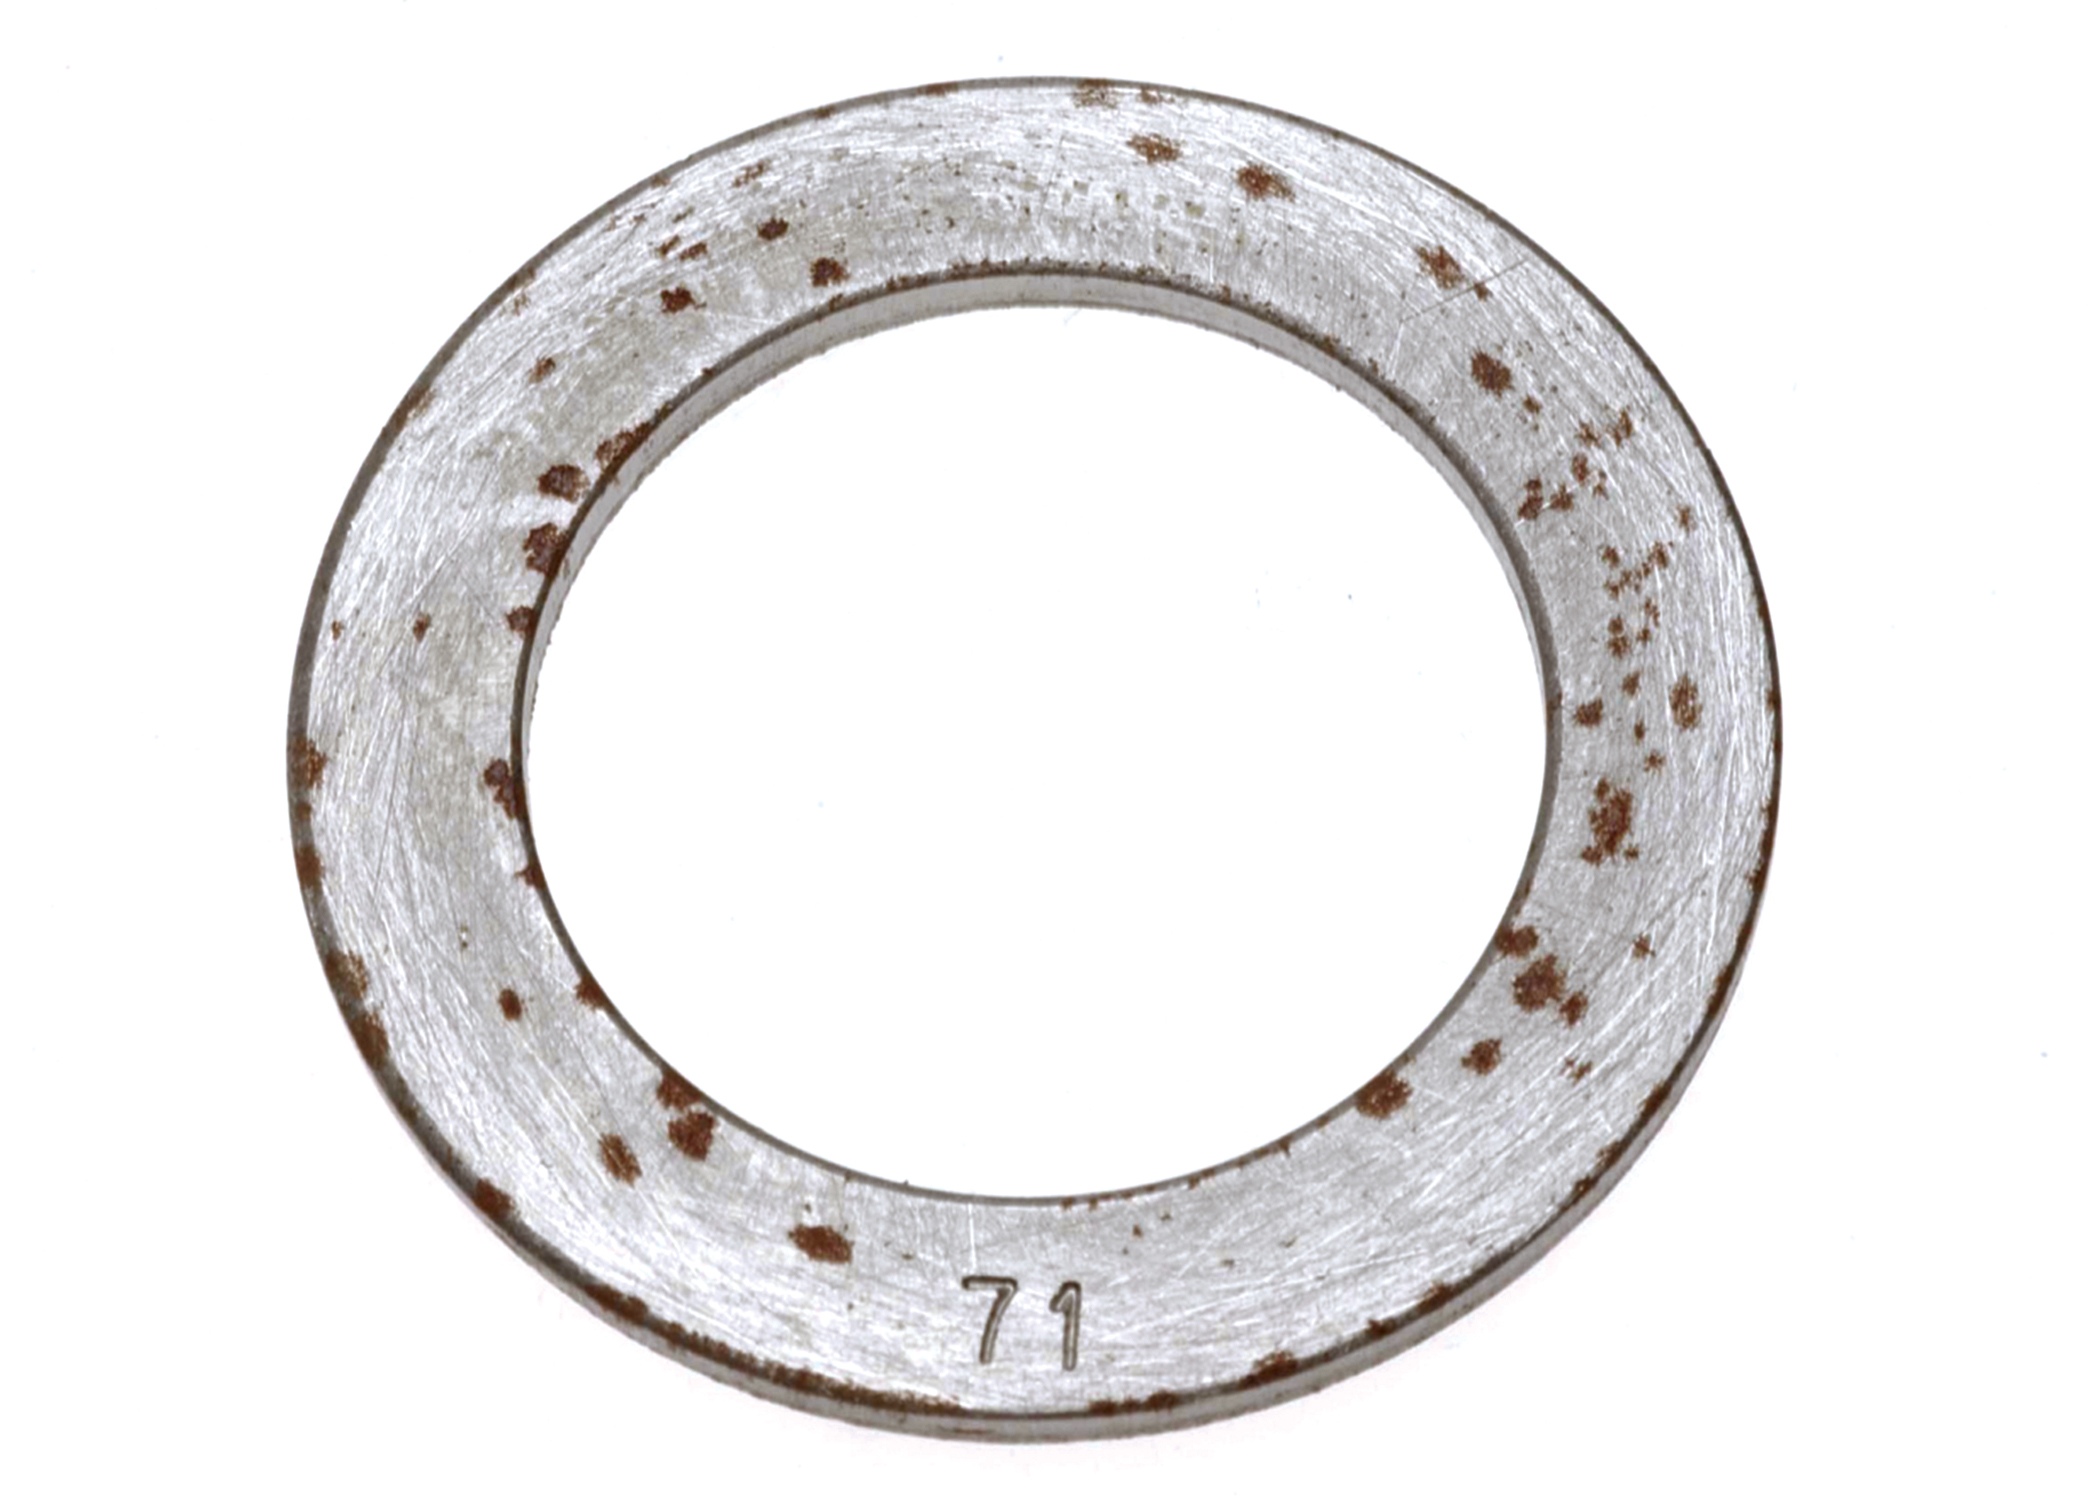 GM GENUINE PARTS - Automatic Transmission Input Clutch Thrust Washer (Reverse) - GMP 8642071